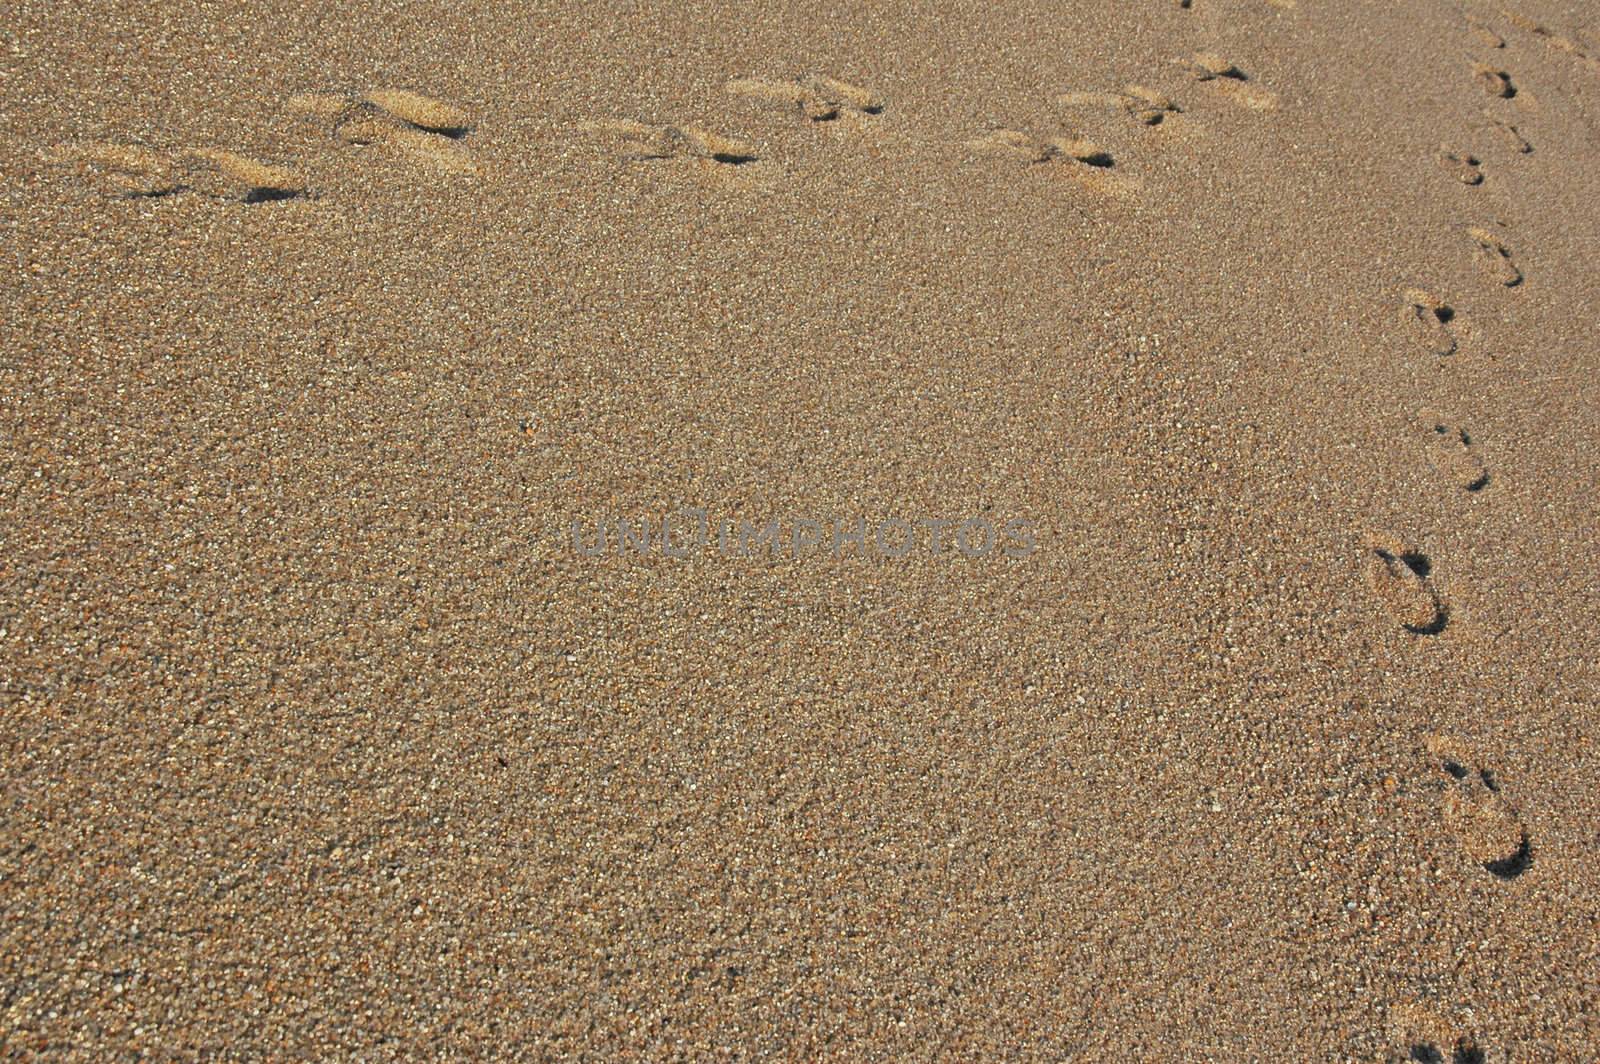 Footprints going over a sand dune by raalves